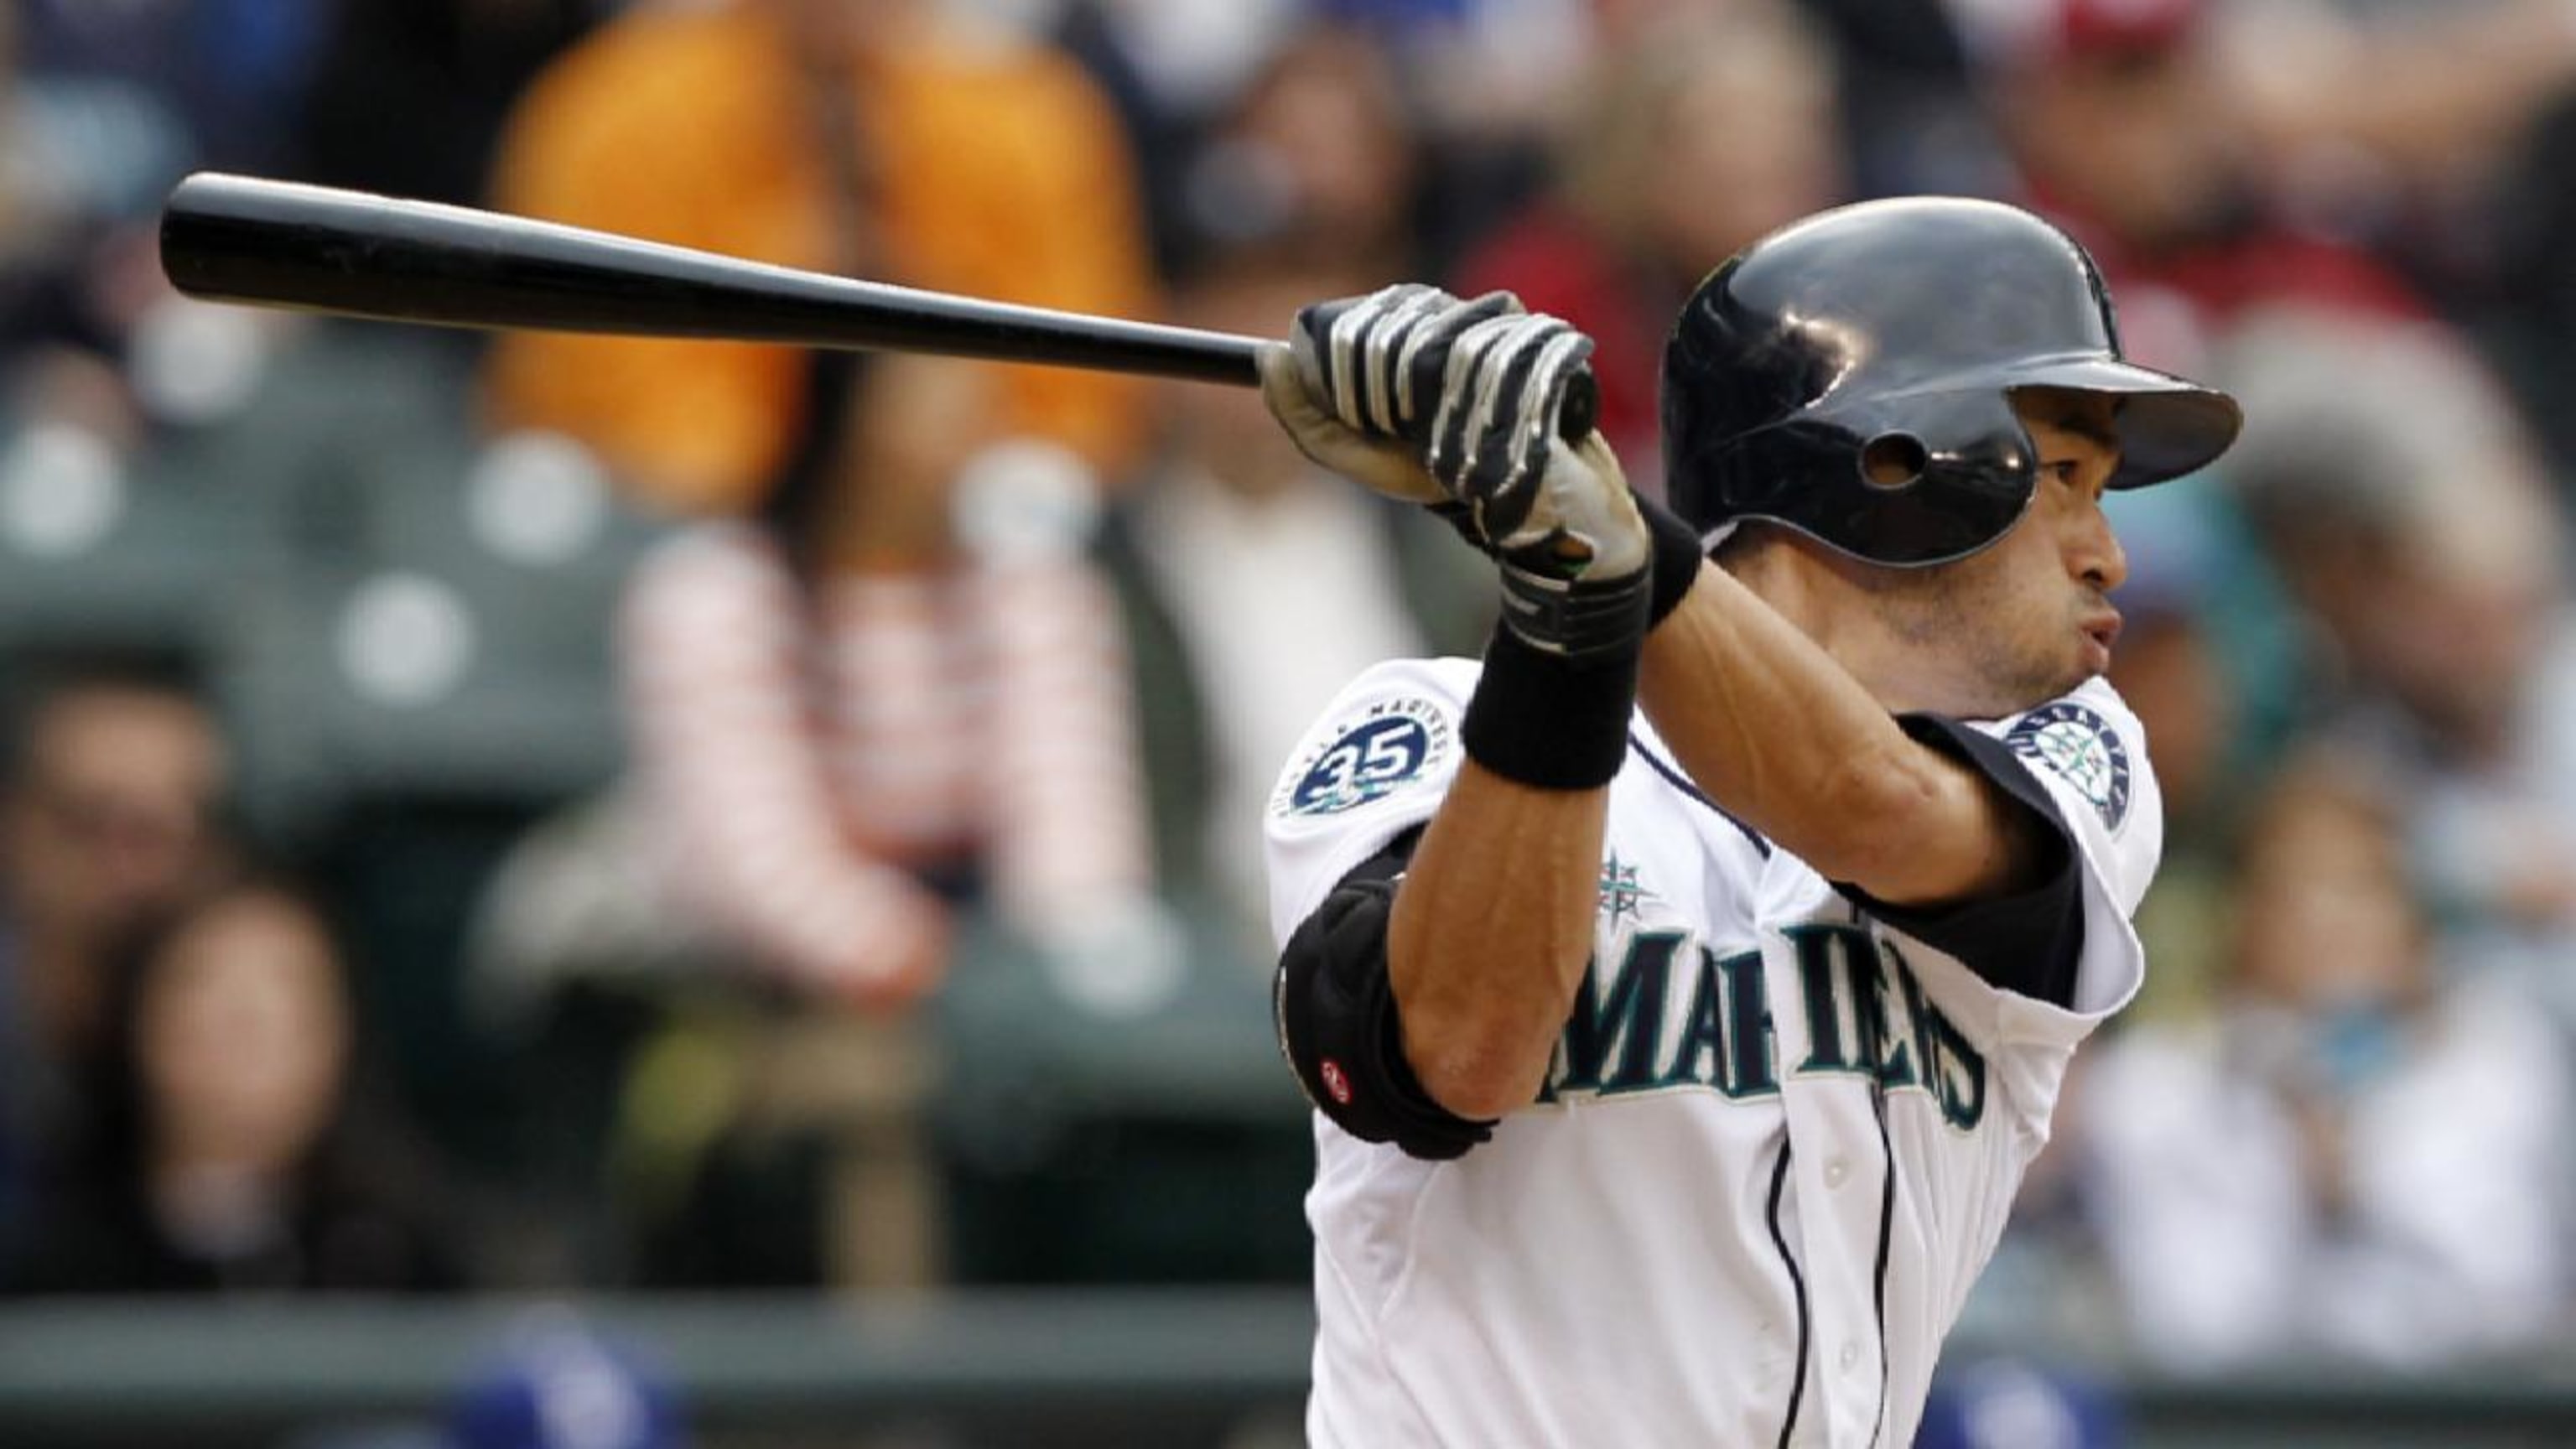 At Cactus League debut, Ichiro says it was a 'special moment' to